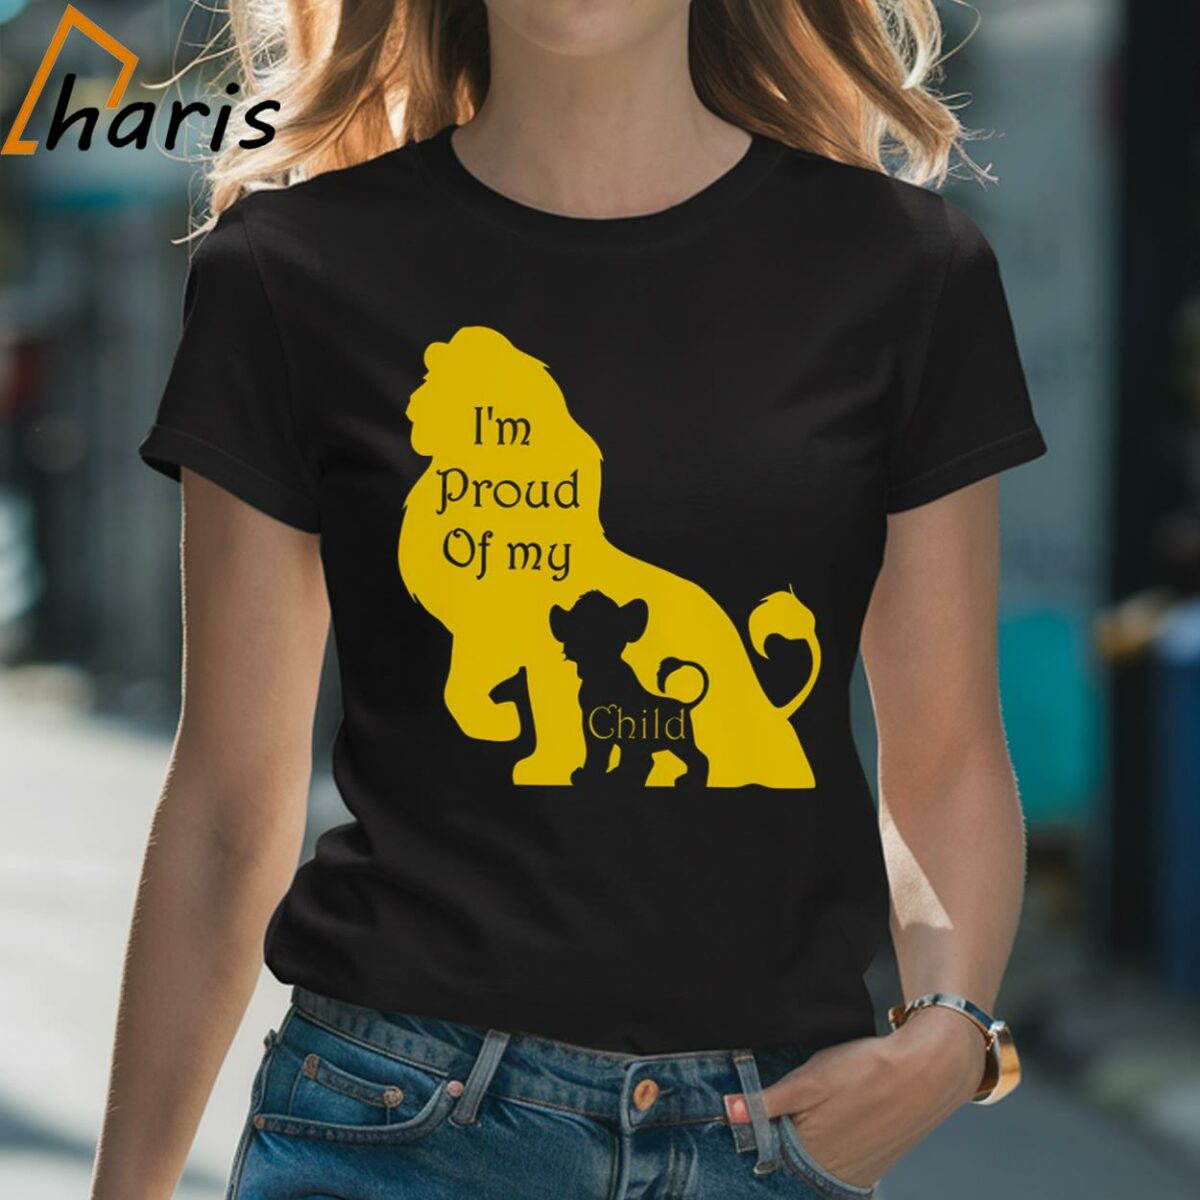 Lion King And Simba Dad And Son Shirt Disney Family Tee Gift For Fathers Day 2 Shirt